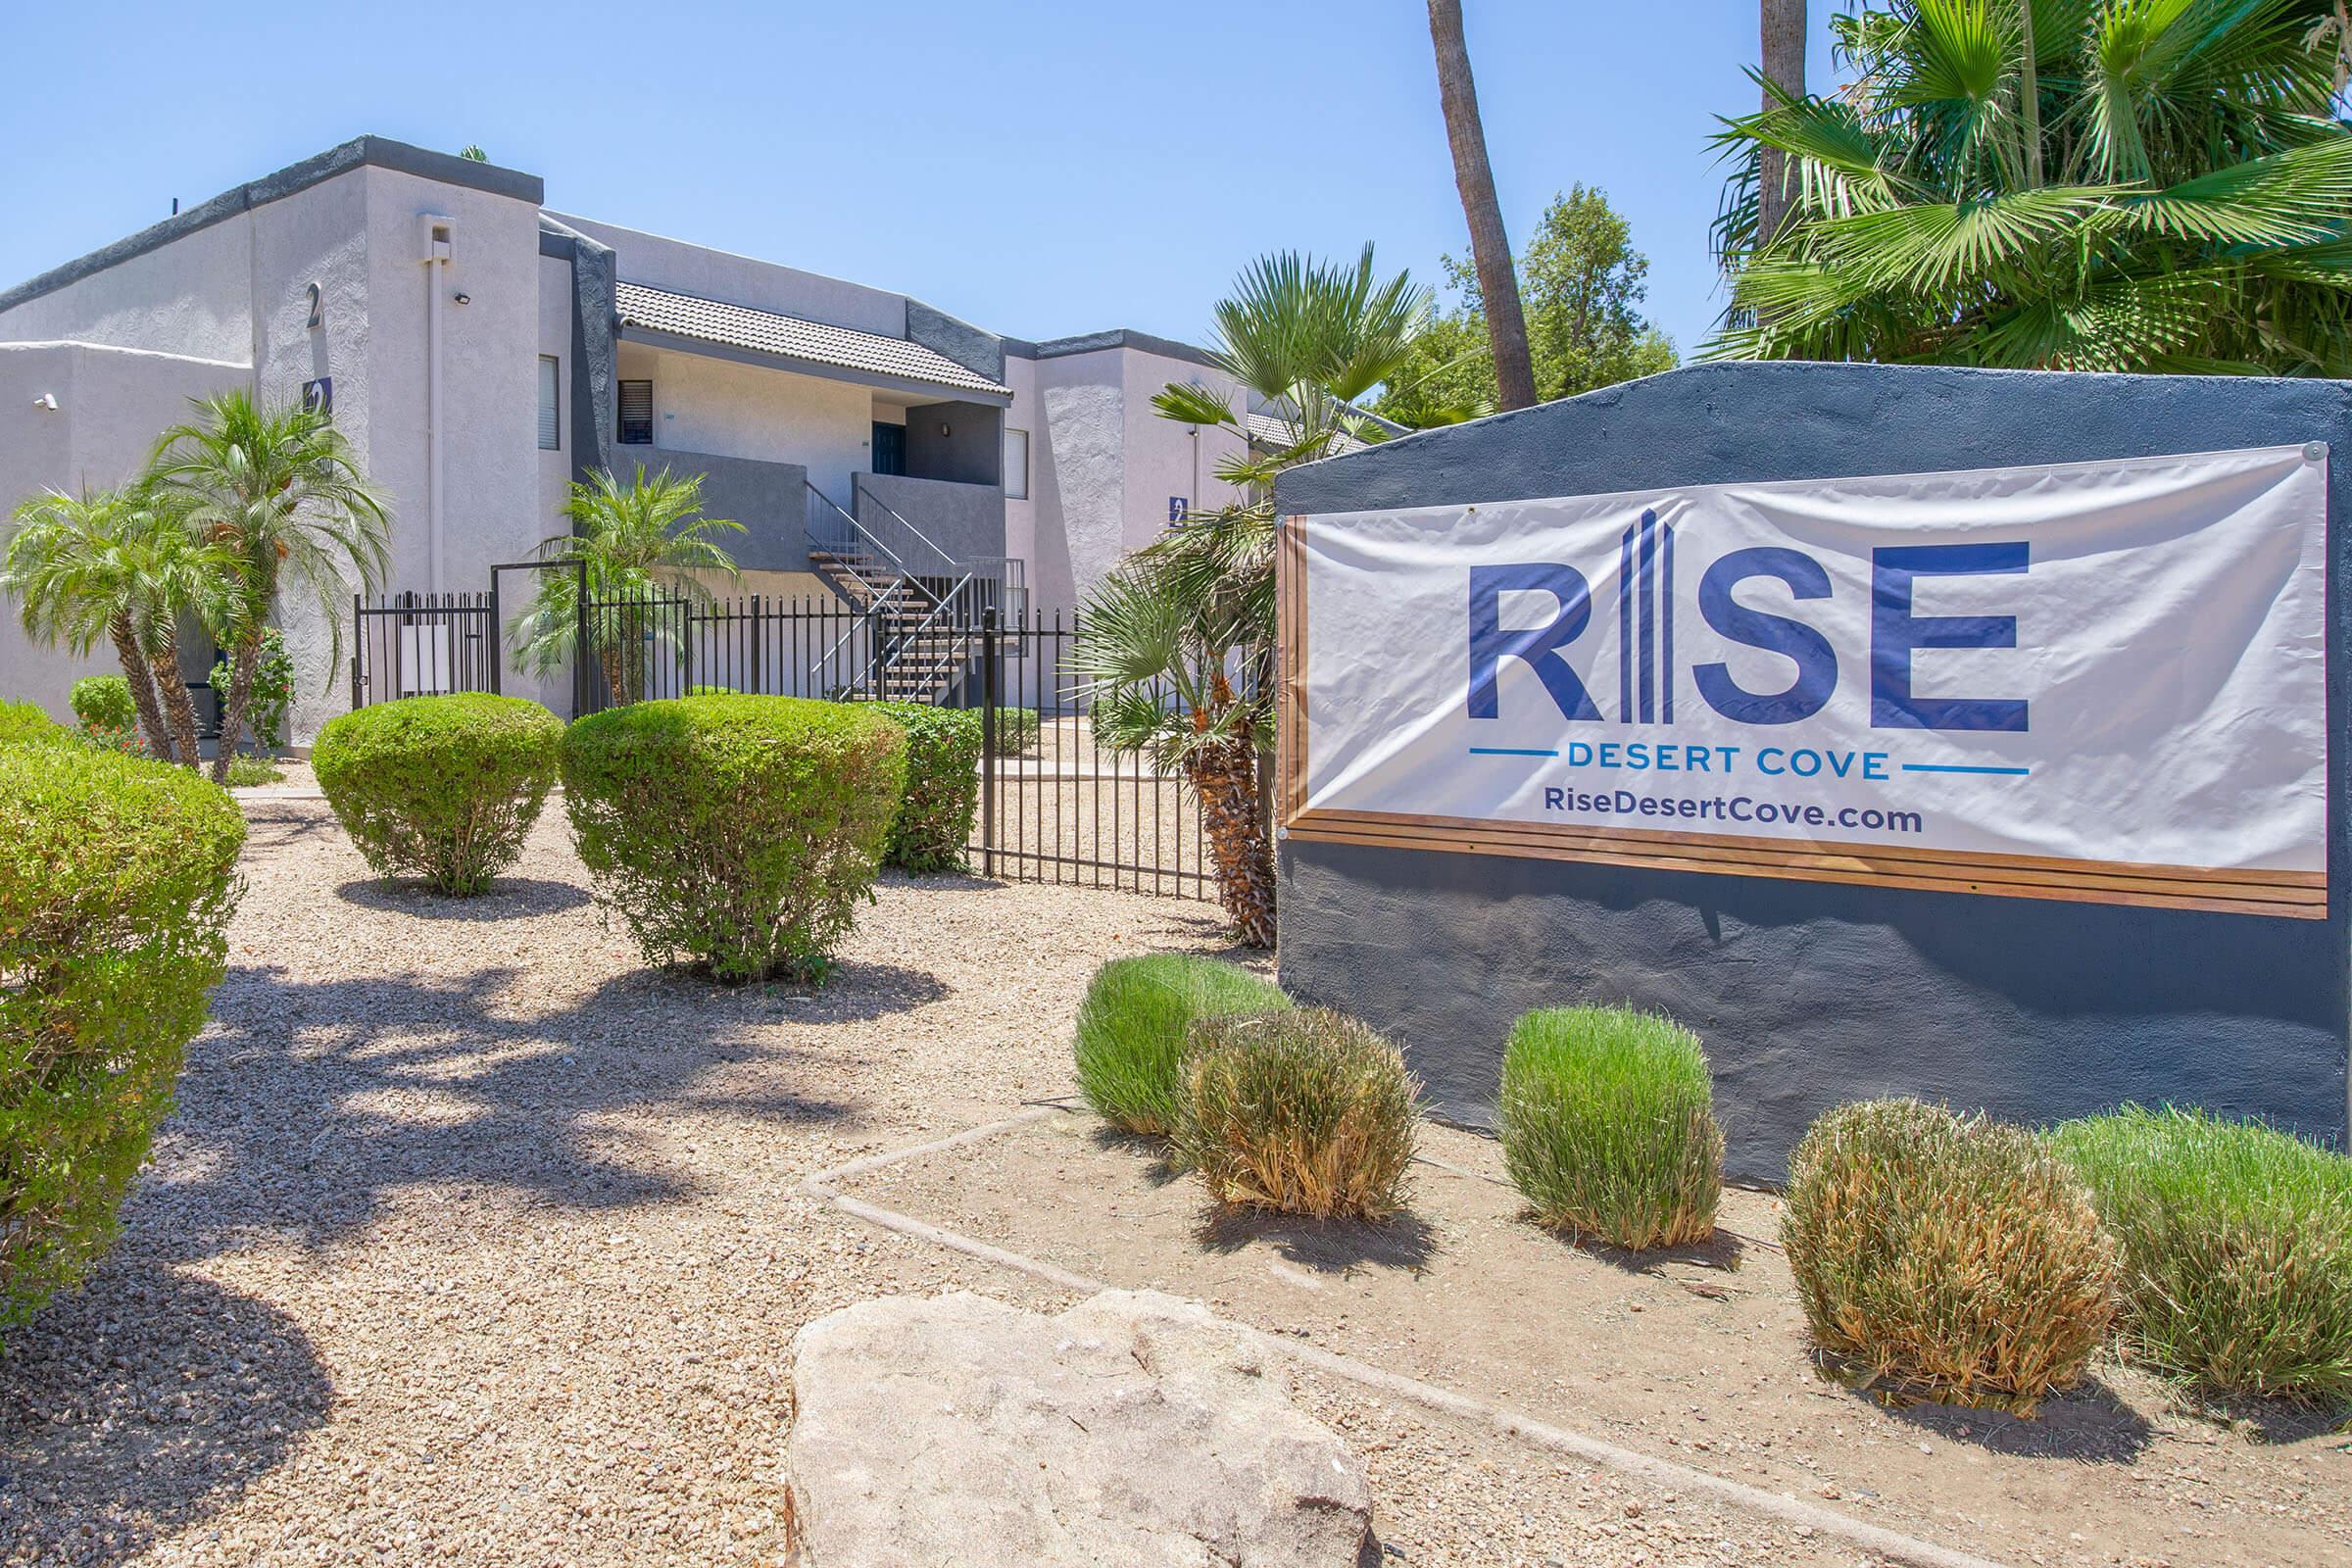 Rise Desert Cove outdoor signage and landscaping in front of their Phoenix, AZ apartment bui.doing